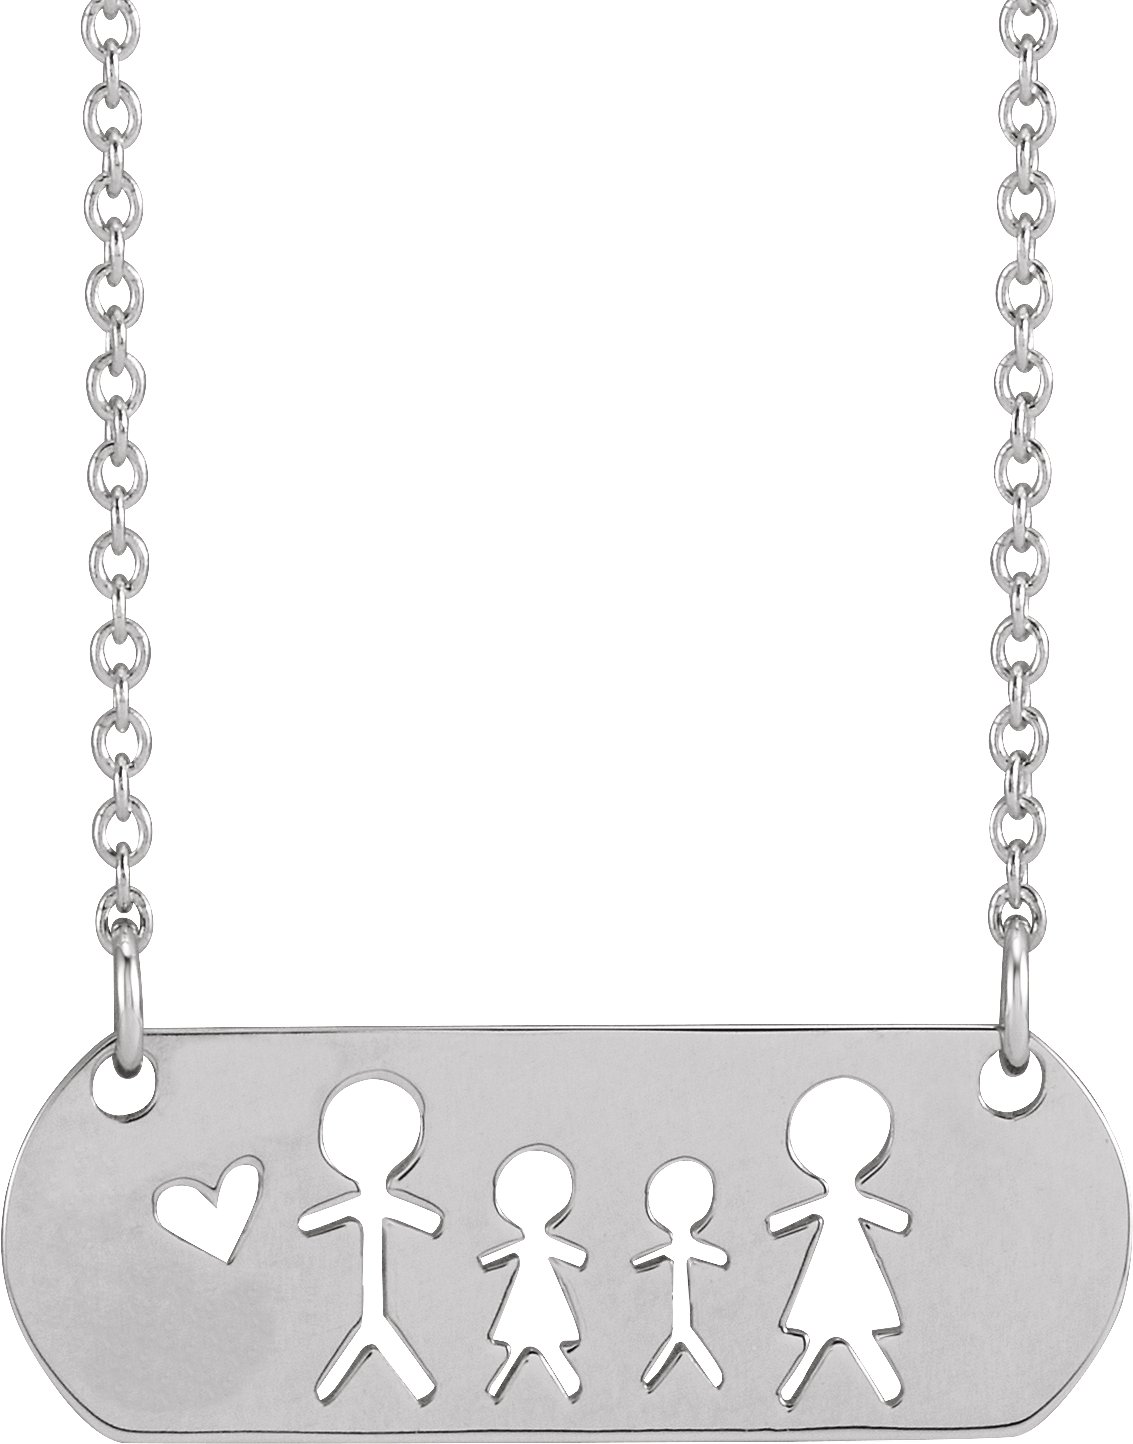 14K White Father, Daughter, Son, & Mother Stick Figure Family 18" Necklace